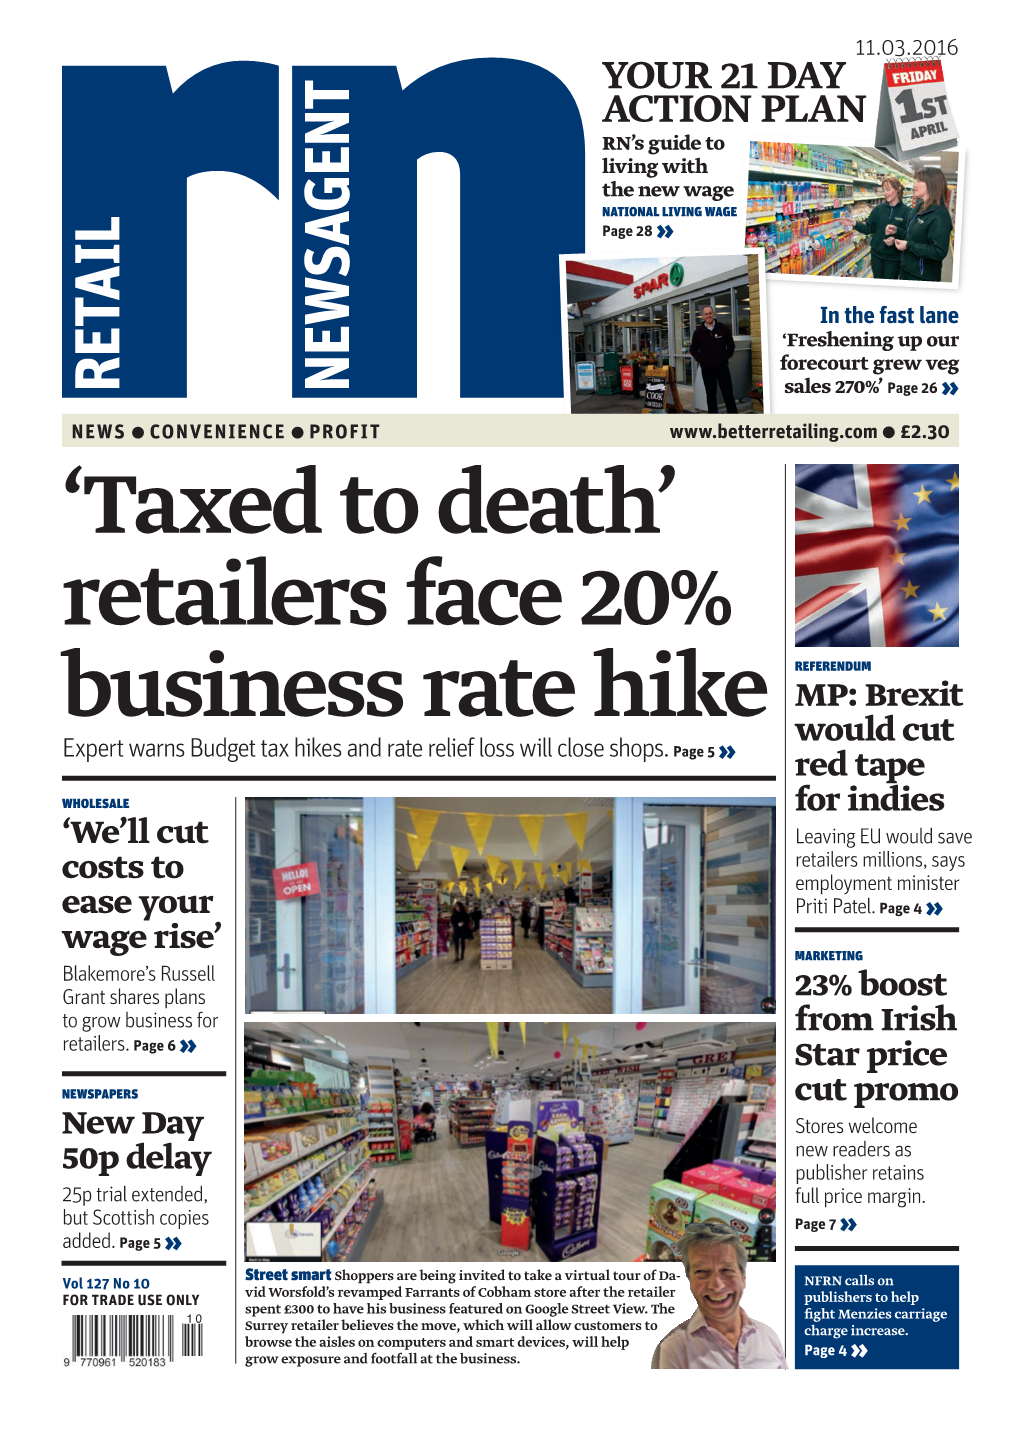 'Taxed to Death' Retailers Face 20% Business Rate Hike